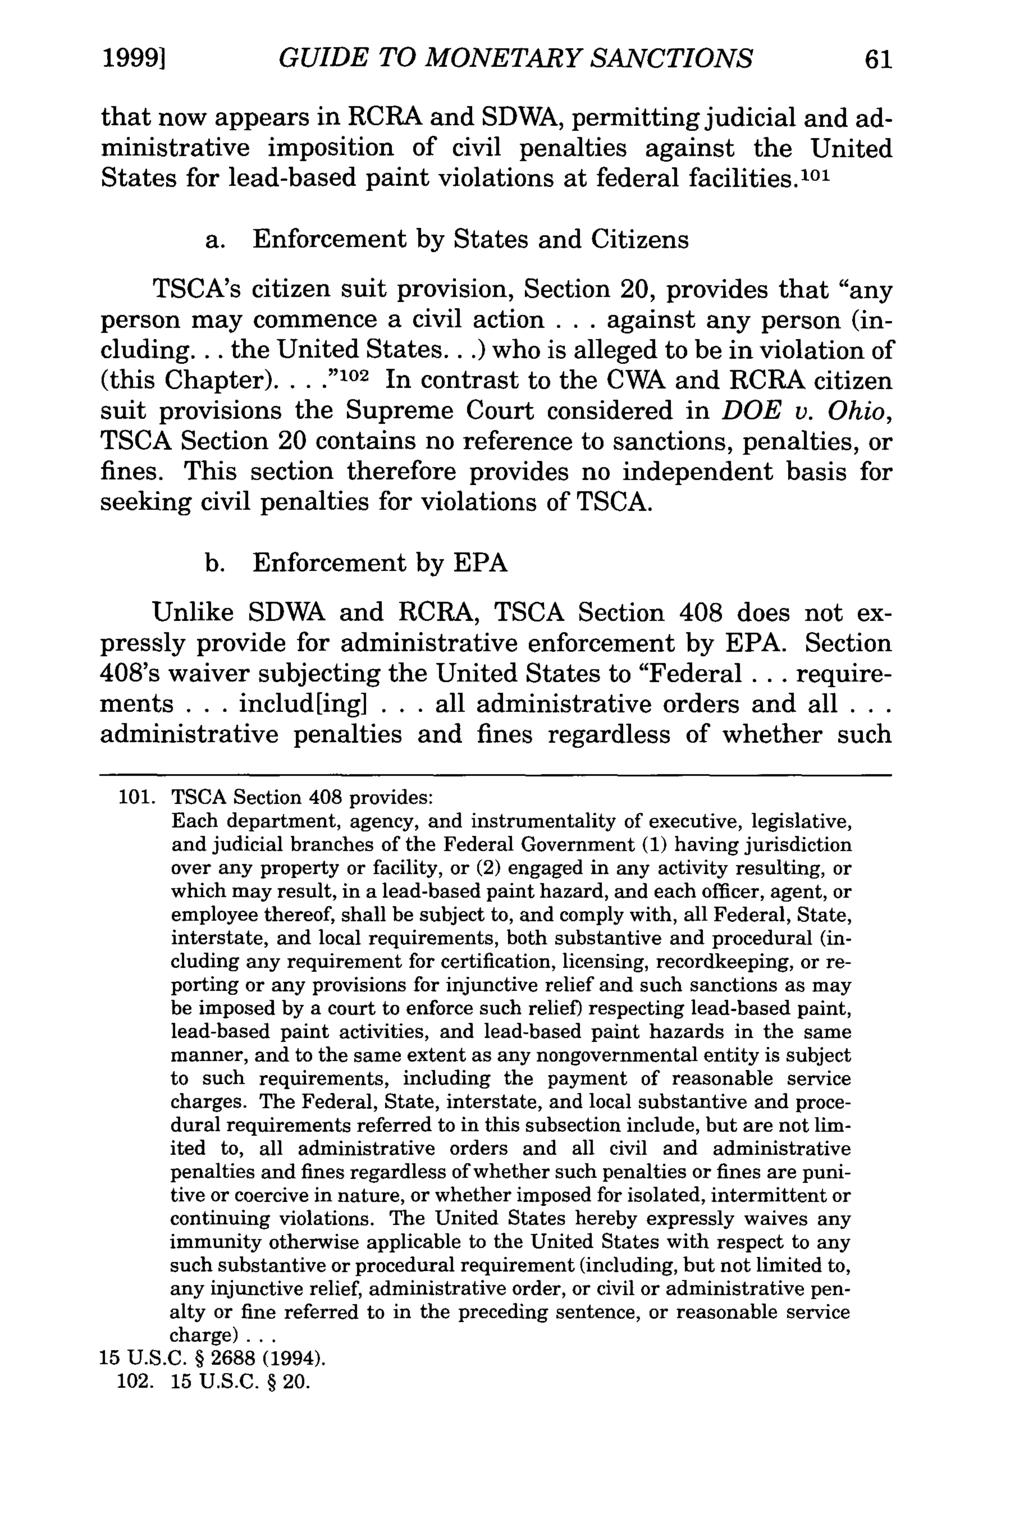 19991 GUIDE TO MONETARY SANCTIONS that now appears in RCRA and SDWA, permitting judicial and administrative imposition of civil penalties against the United States for lead-based paint violations at